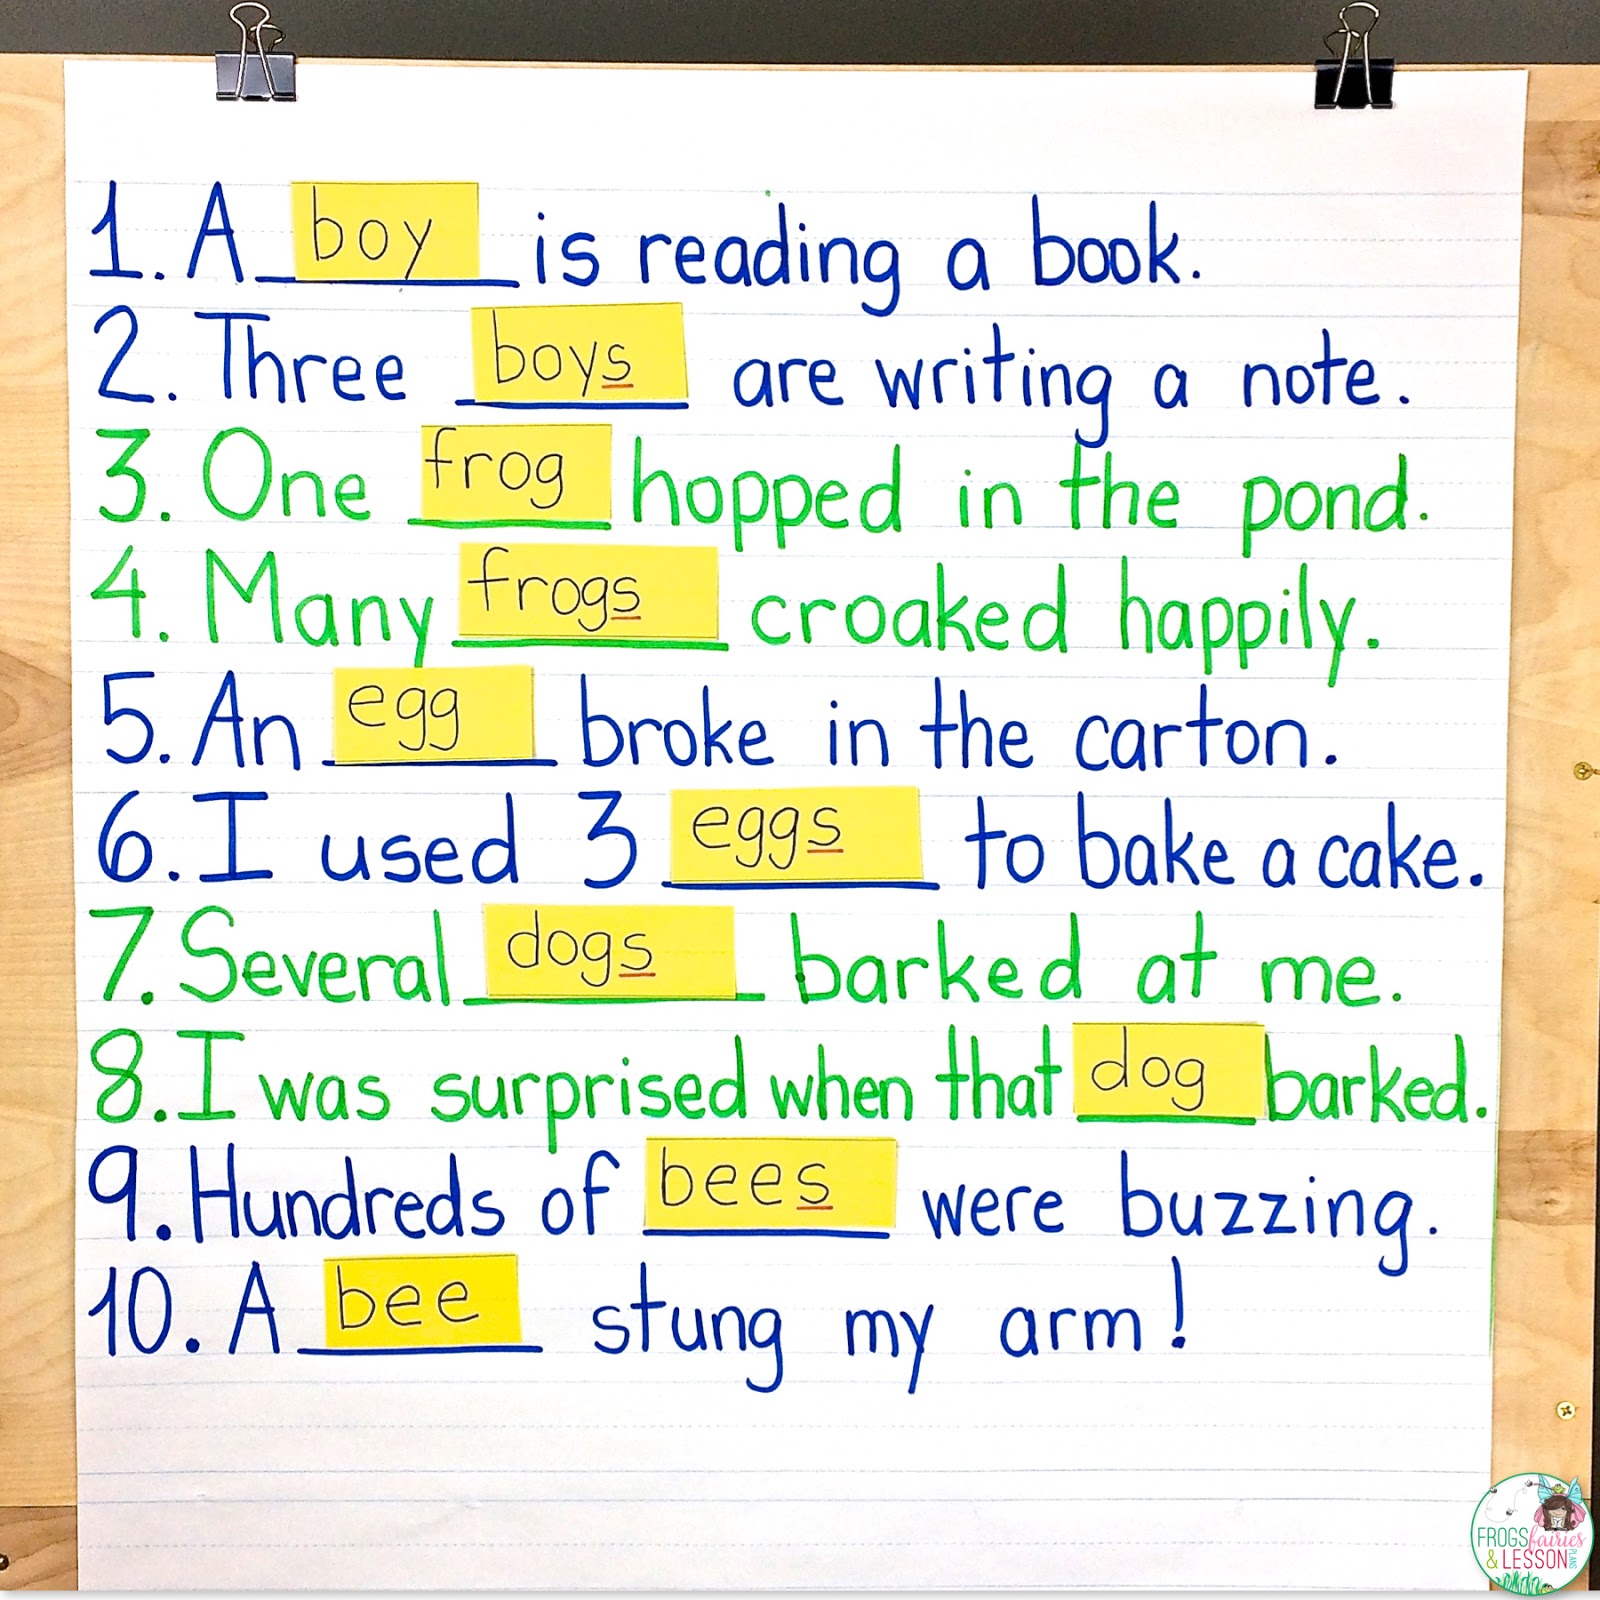 frogs-fairies-and-lesson-plans-5-noun-lessons-you-need-to-teach-in-1st-grade-part-2